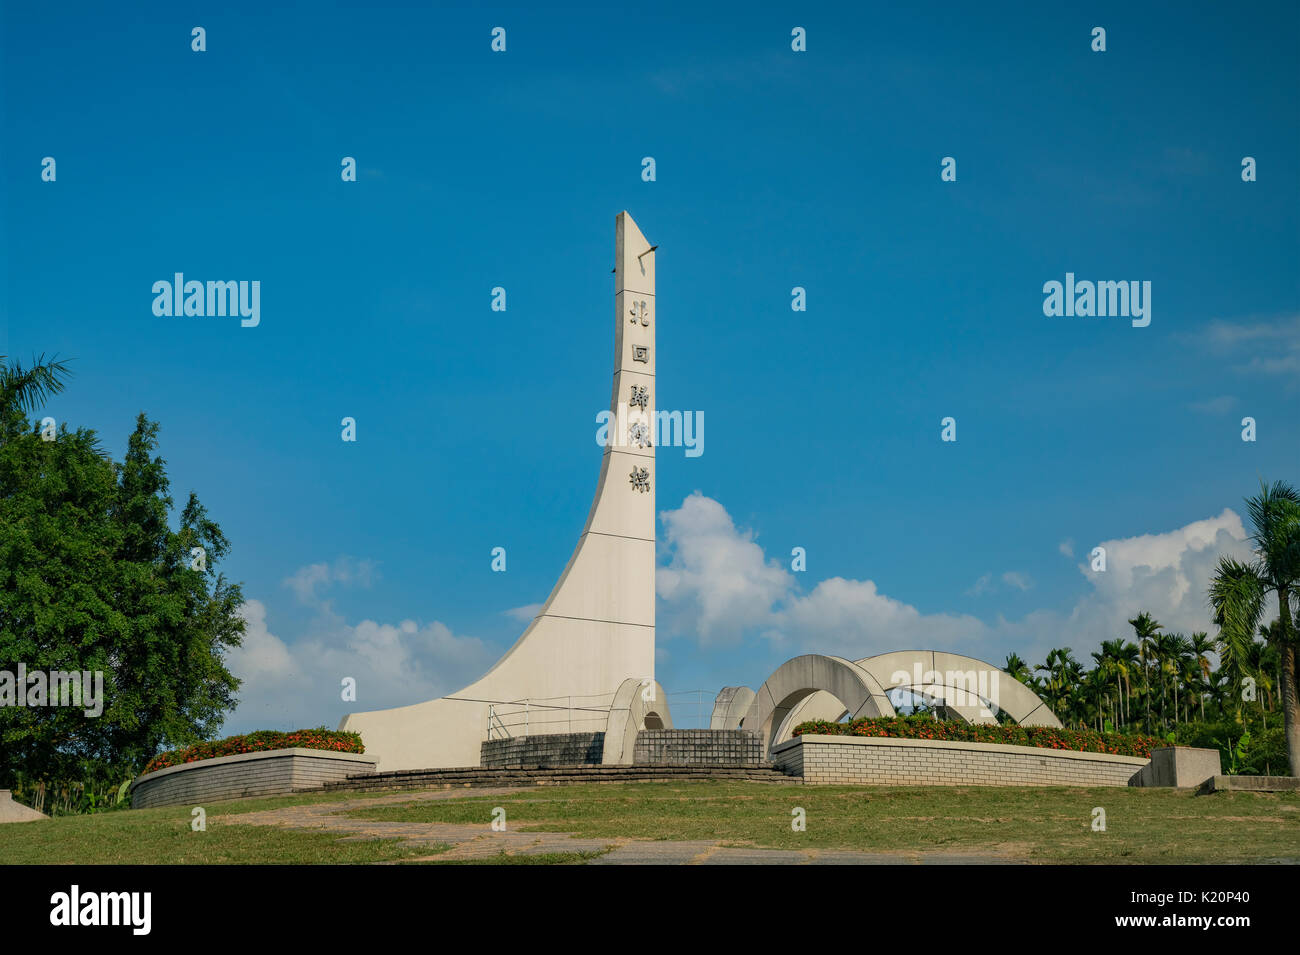 Landmark of the Tropic of Cancer at Hualien, Taiwan Stock Photo